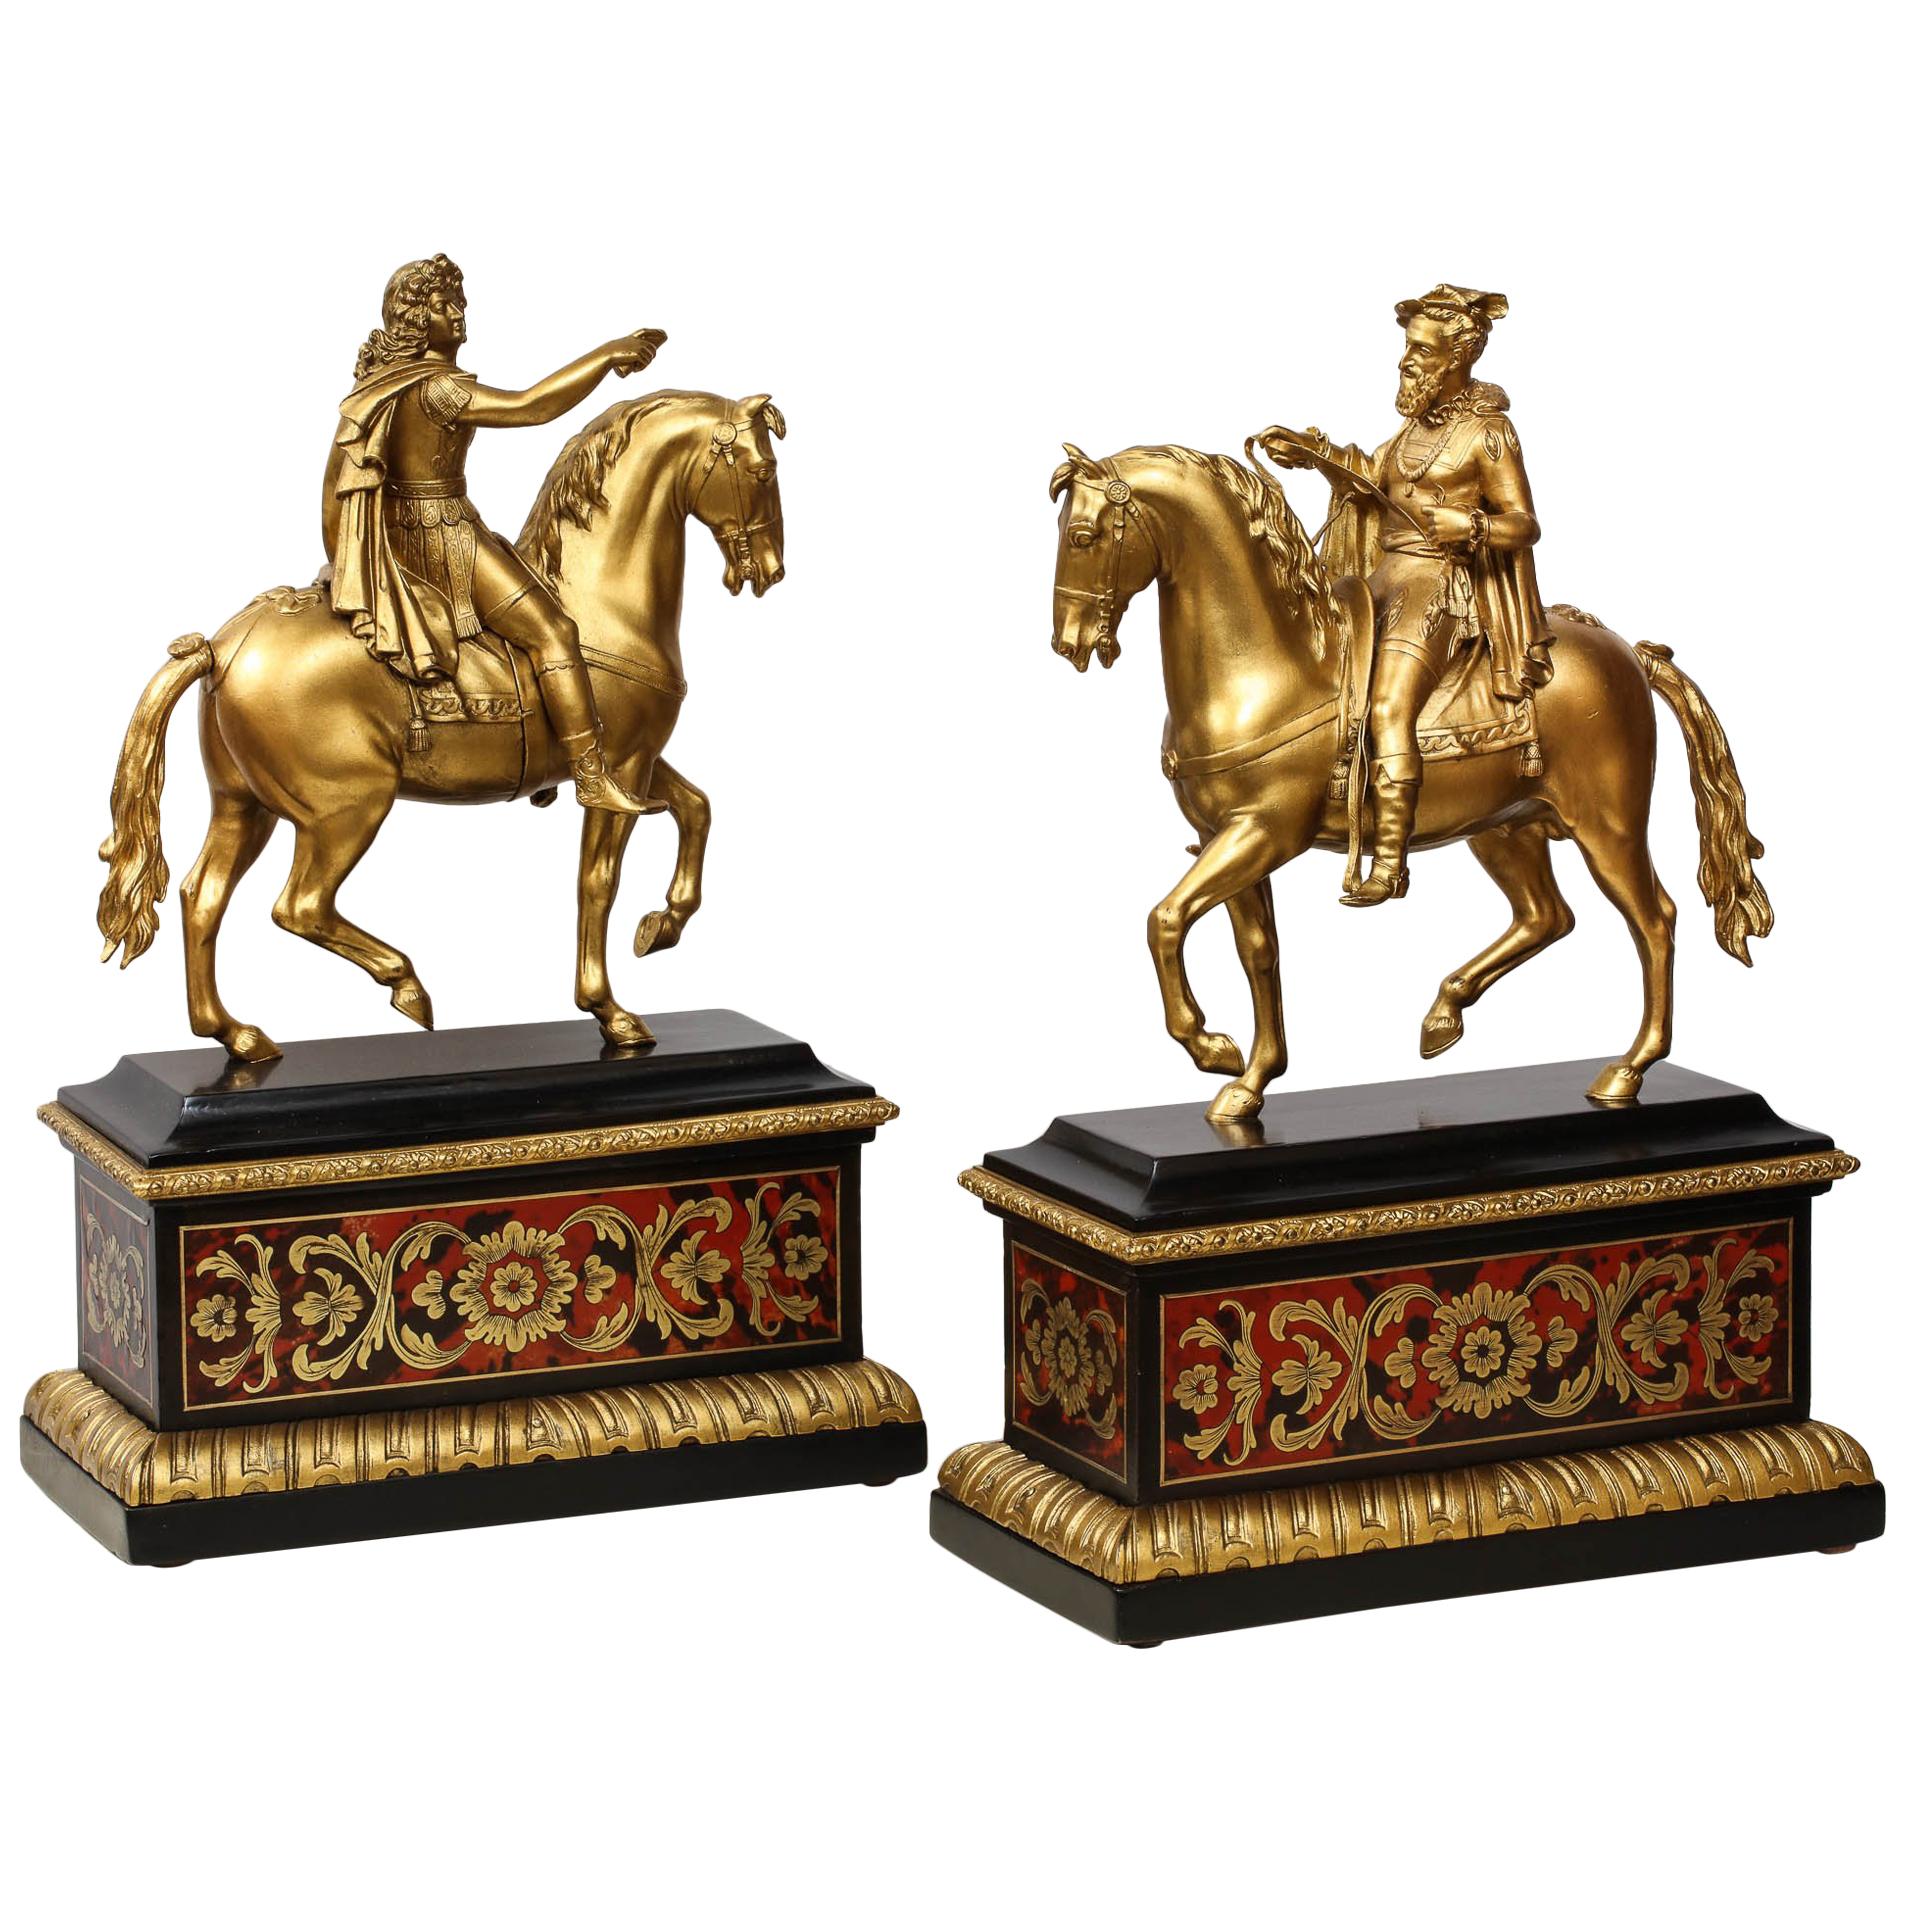 A pair of French gilt bronze figures on horses of Louis XIV and Francois I on Boulle bases,
circa 1890.

Very good quality, excellent condition.
(can be used as bookends)

Measures: 16